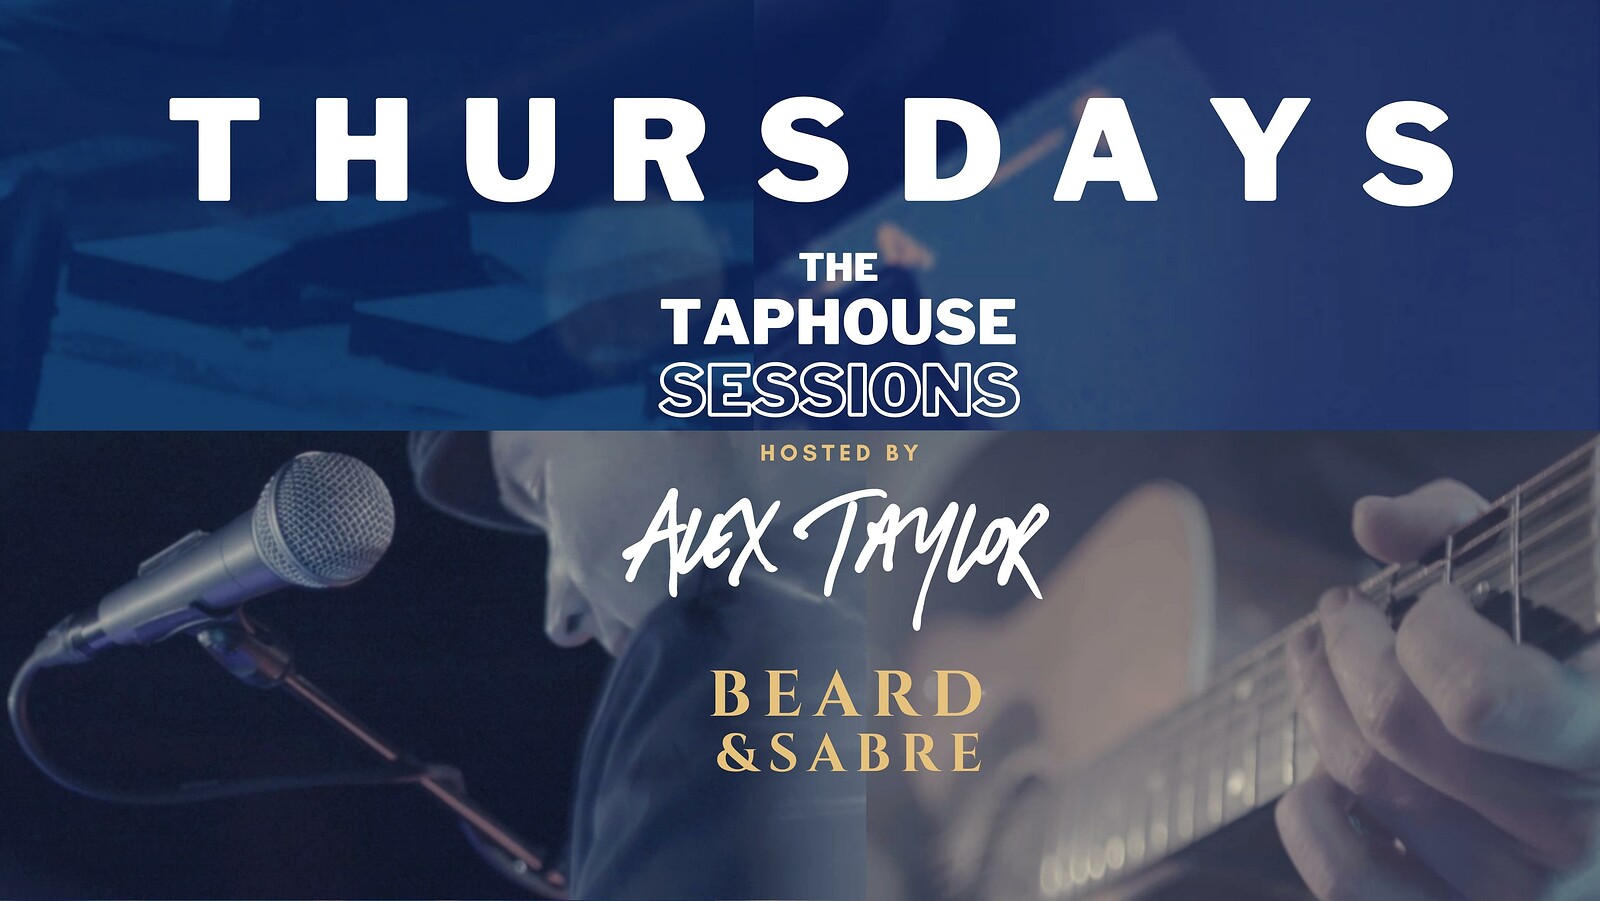 The Taphouse Sessions feat. LAURA GOUCHER at Beard & Sabre